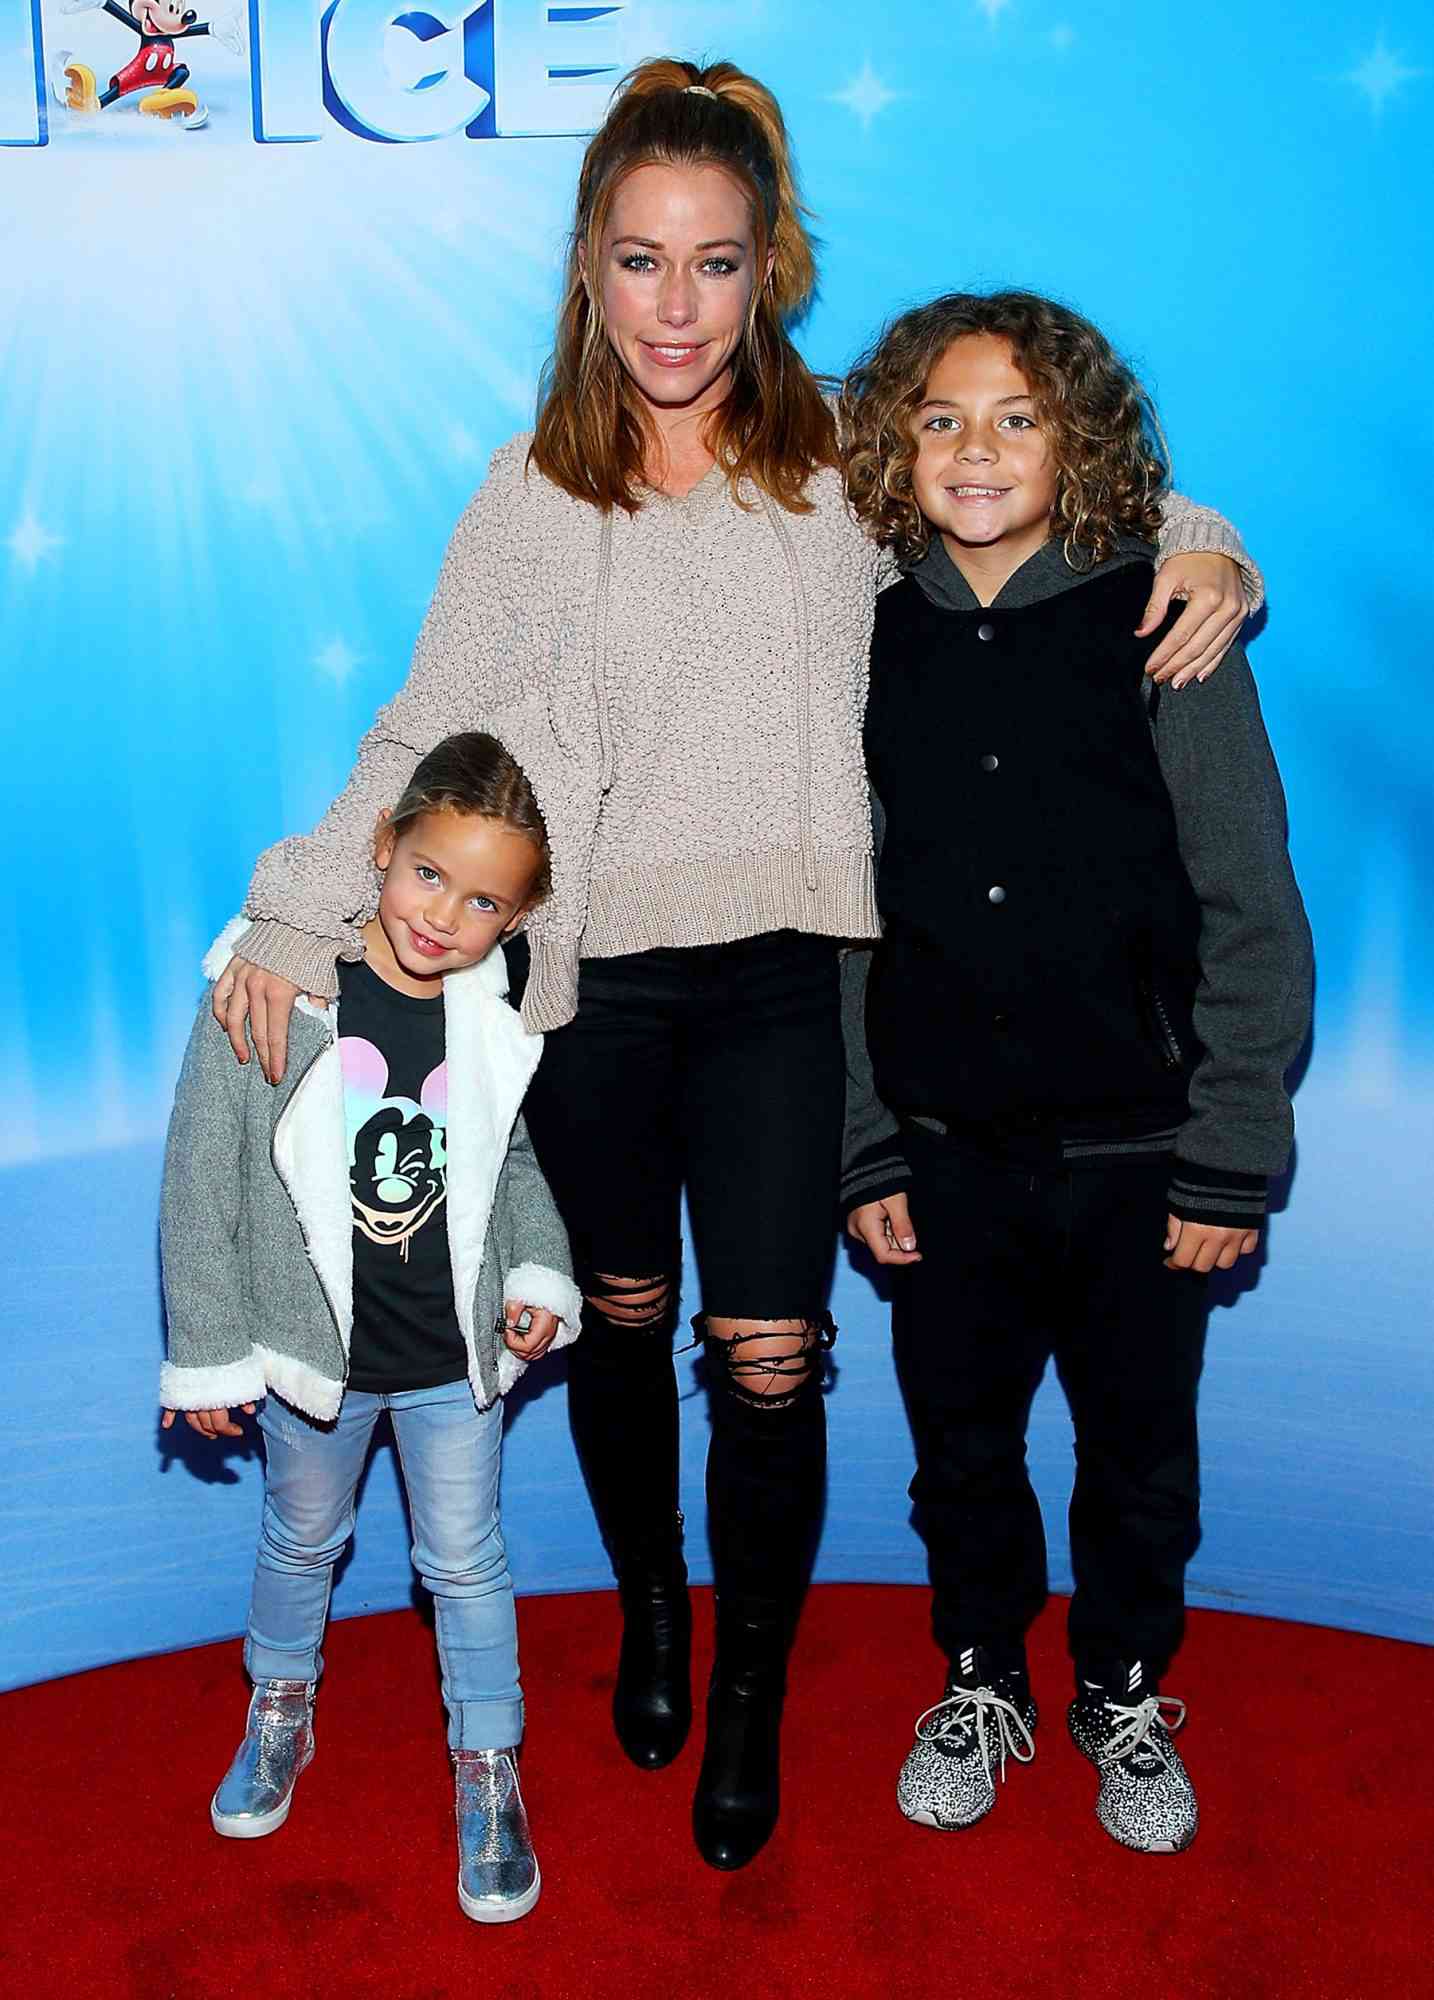 Kendra Wilkinson Admits to 'Rough Start' with Co-Parenting: 'The Guilt Would Set In'